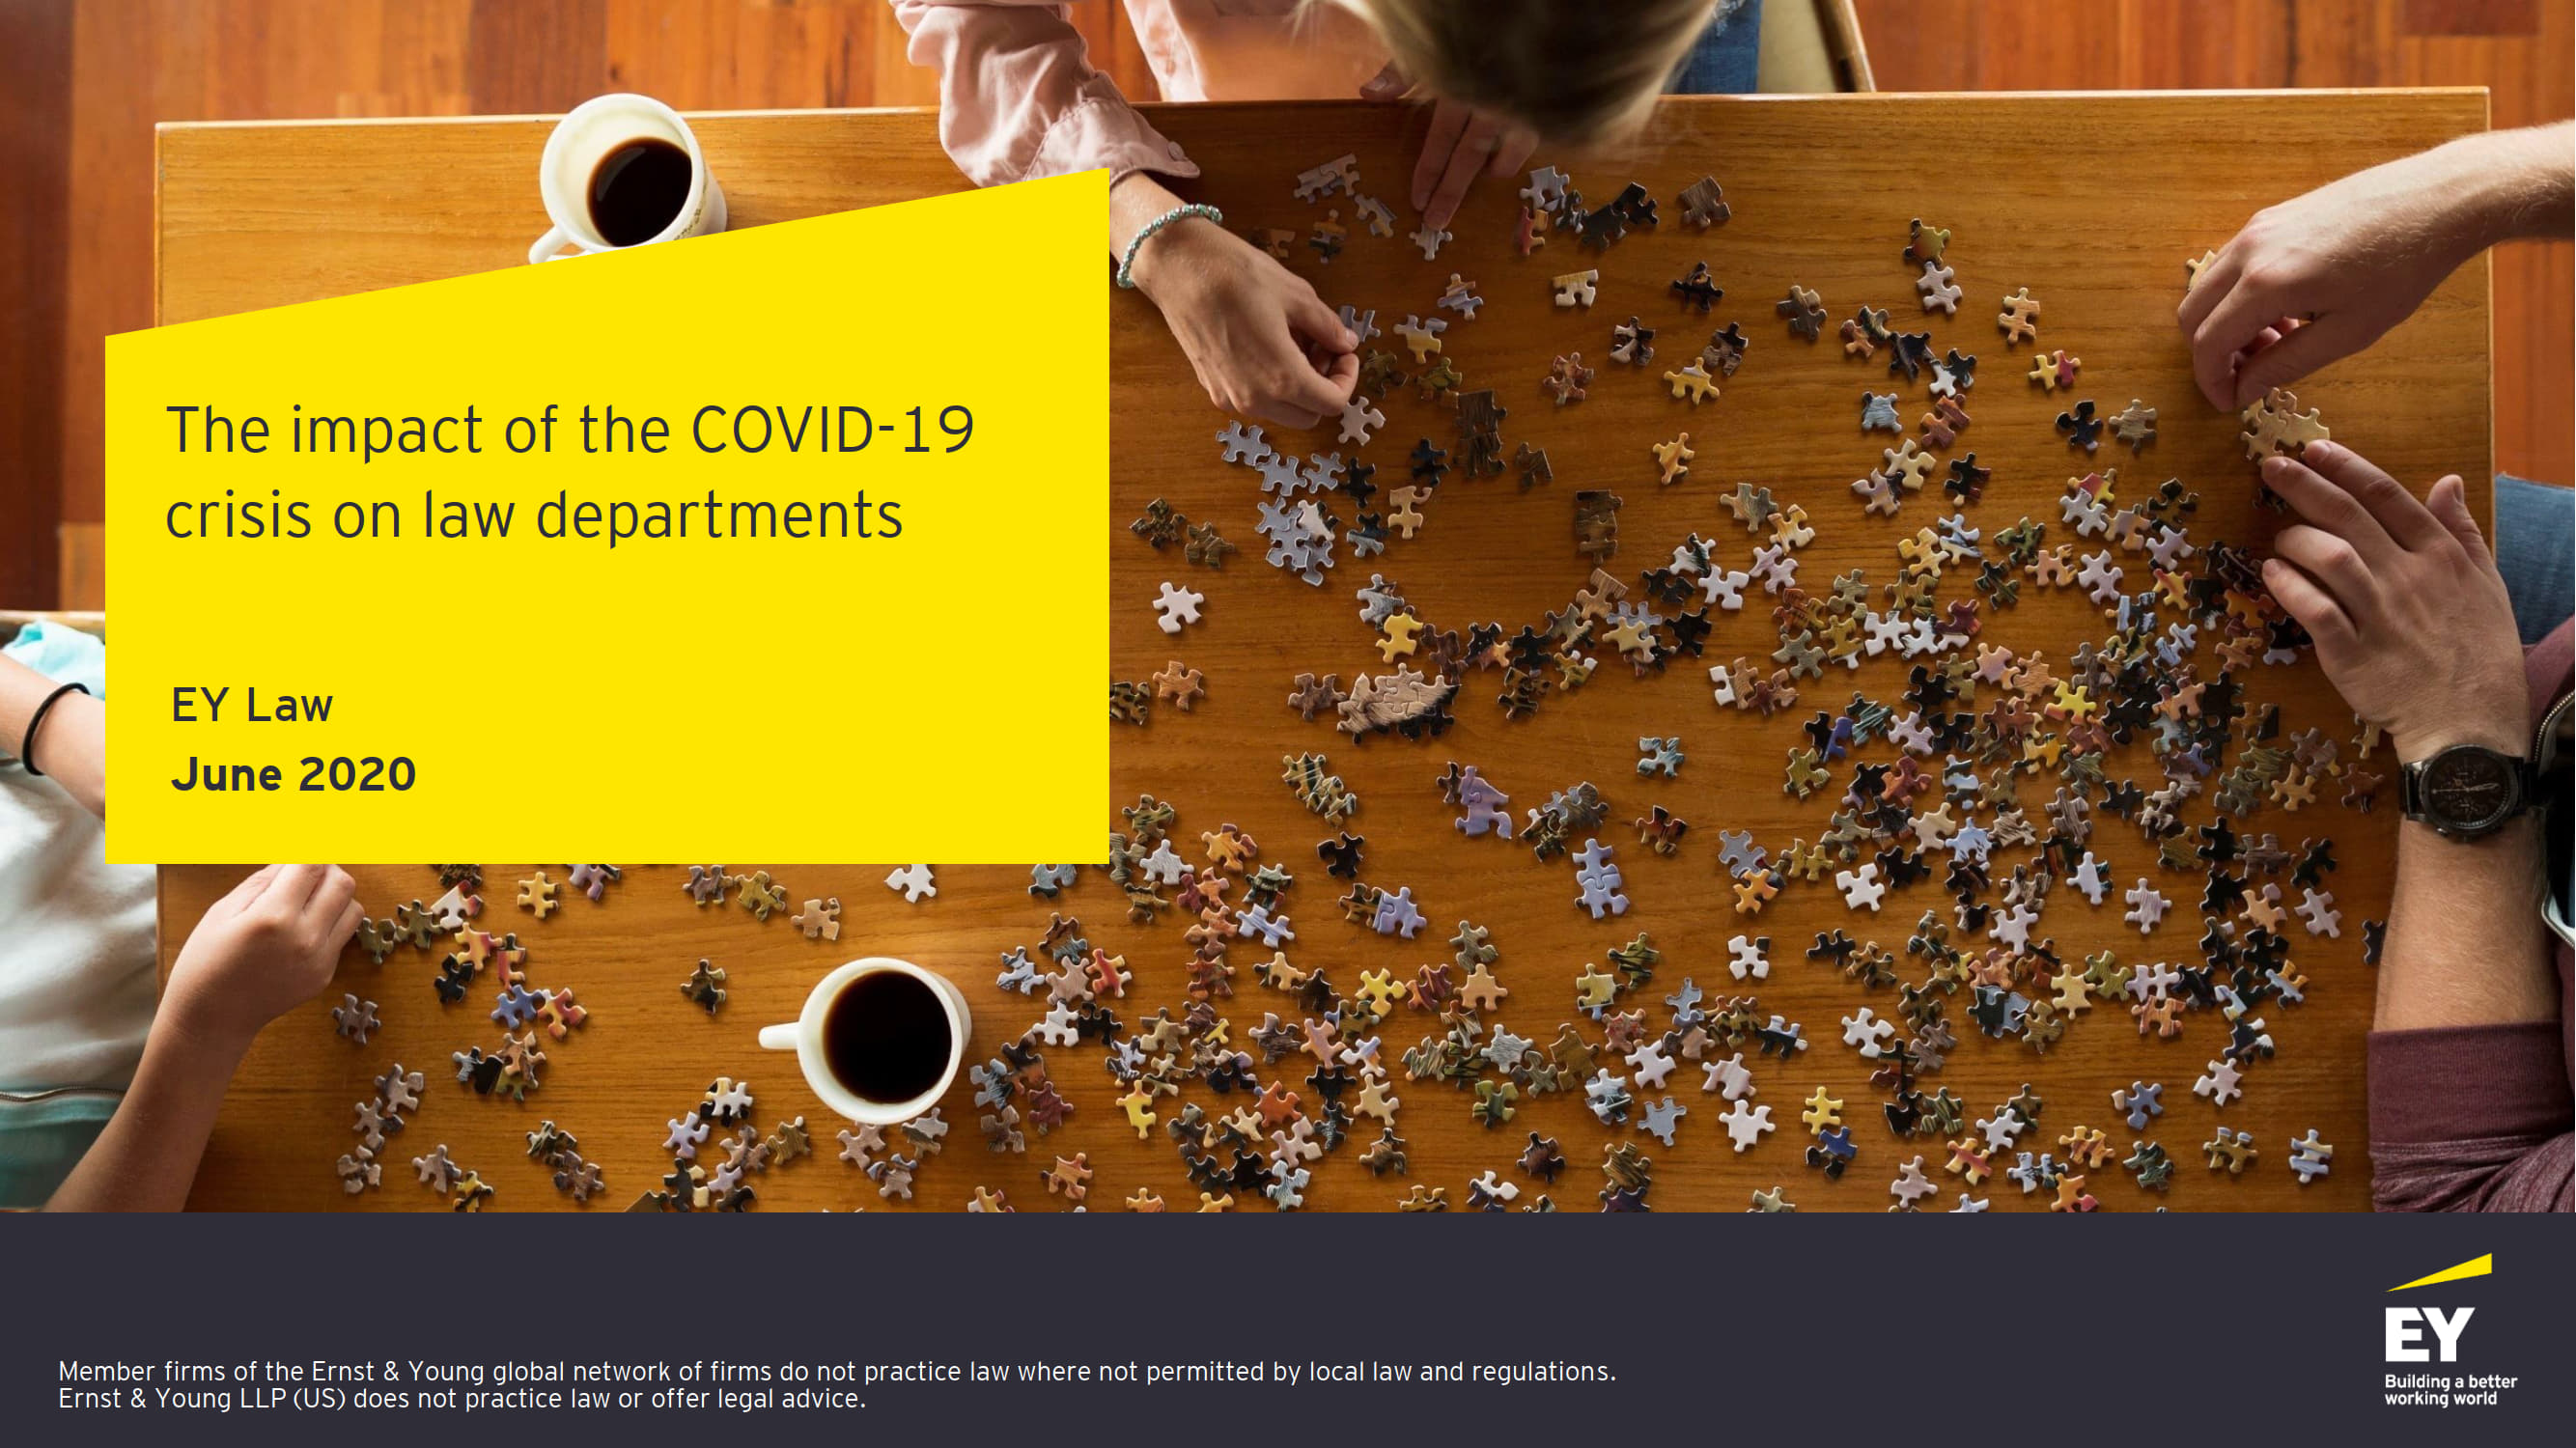 The impact of the COVID-19 crisis on law departments, June 2020